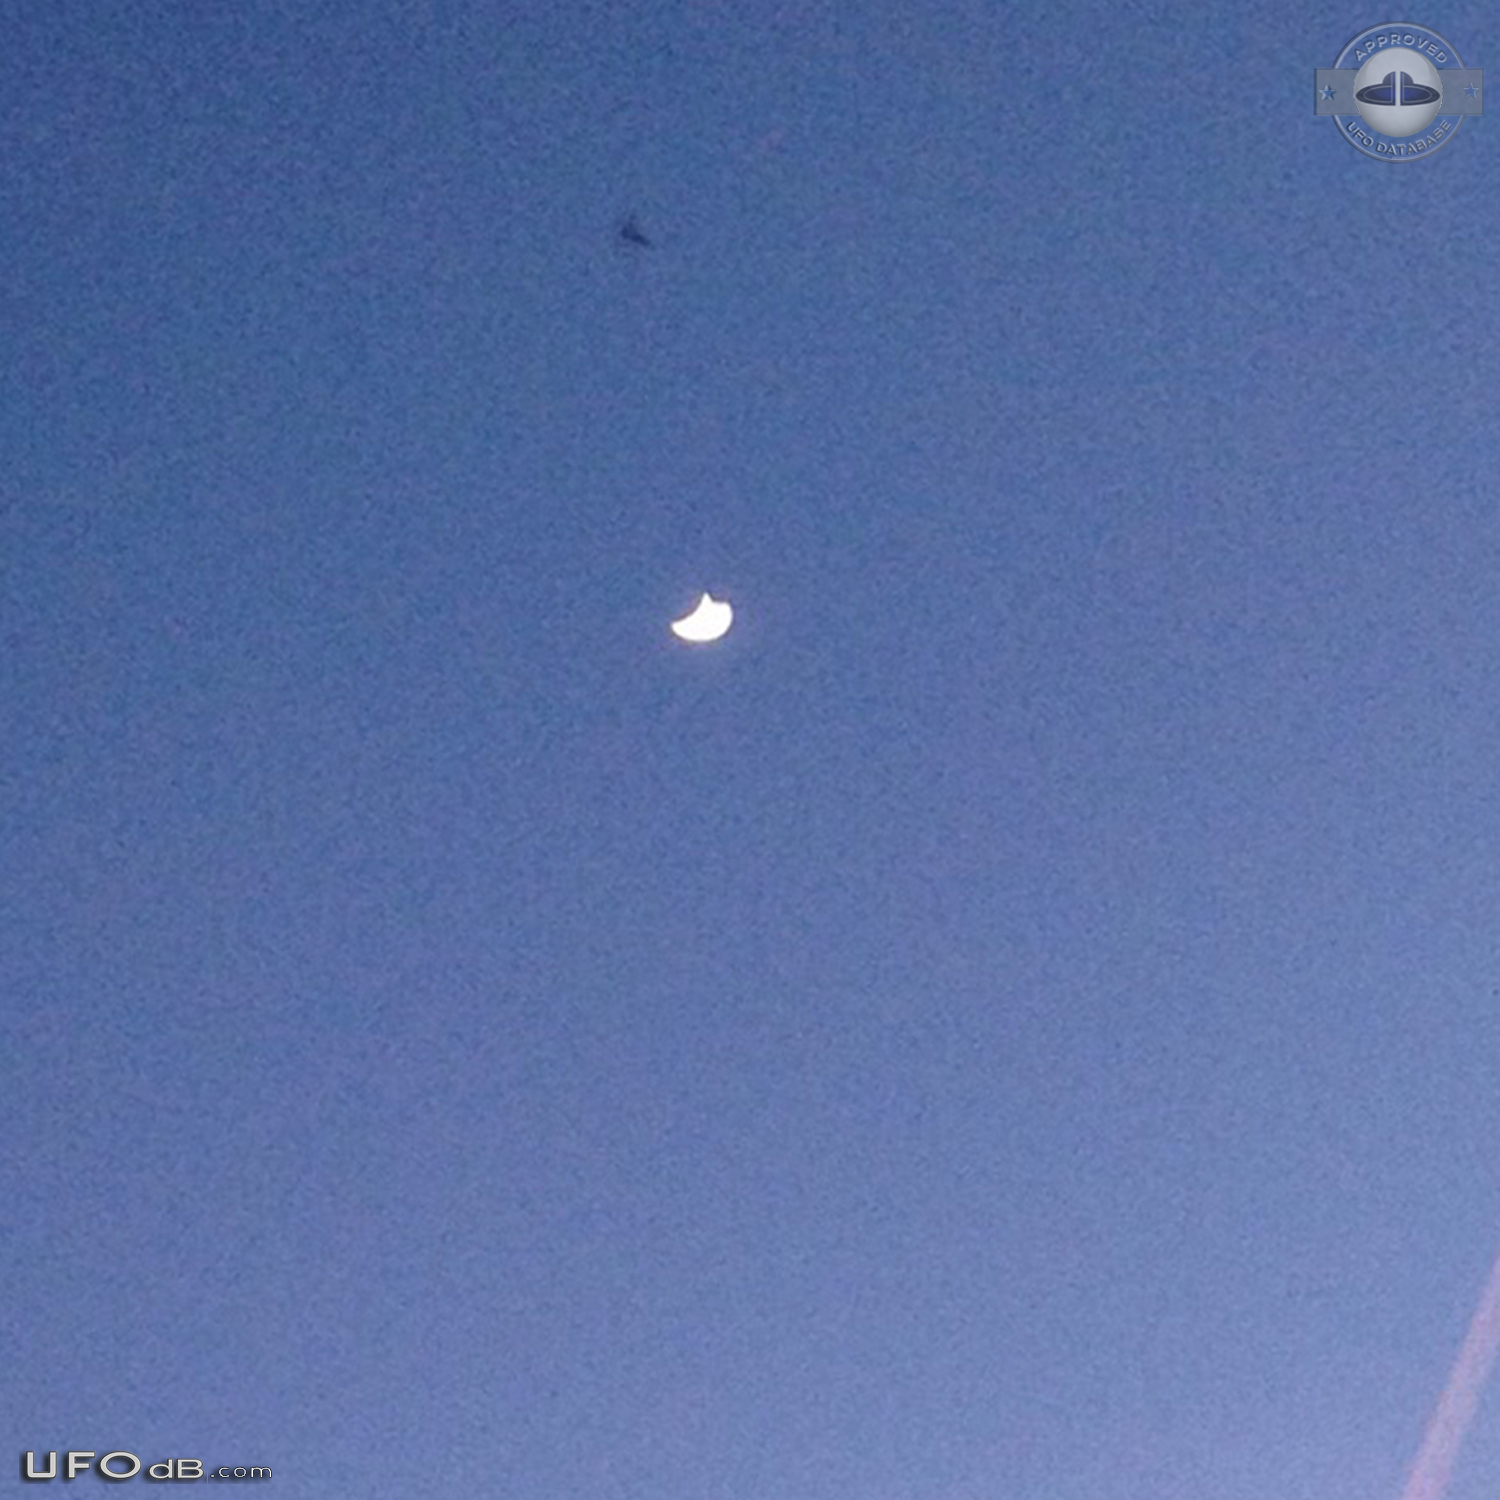 Triangle object moved at high speed, then stationary - Trinity Florida UFO Picture #677-3